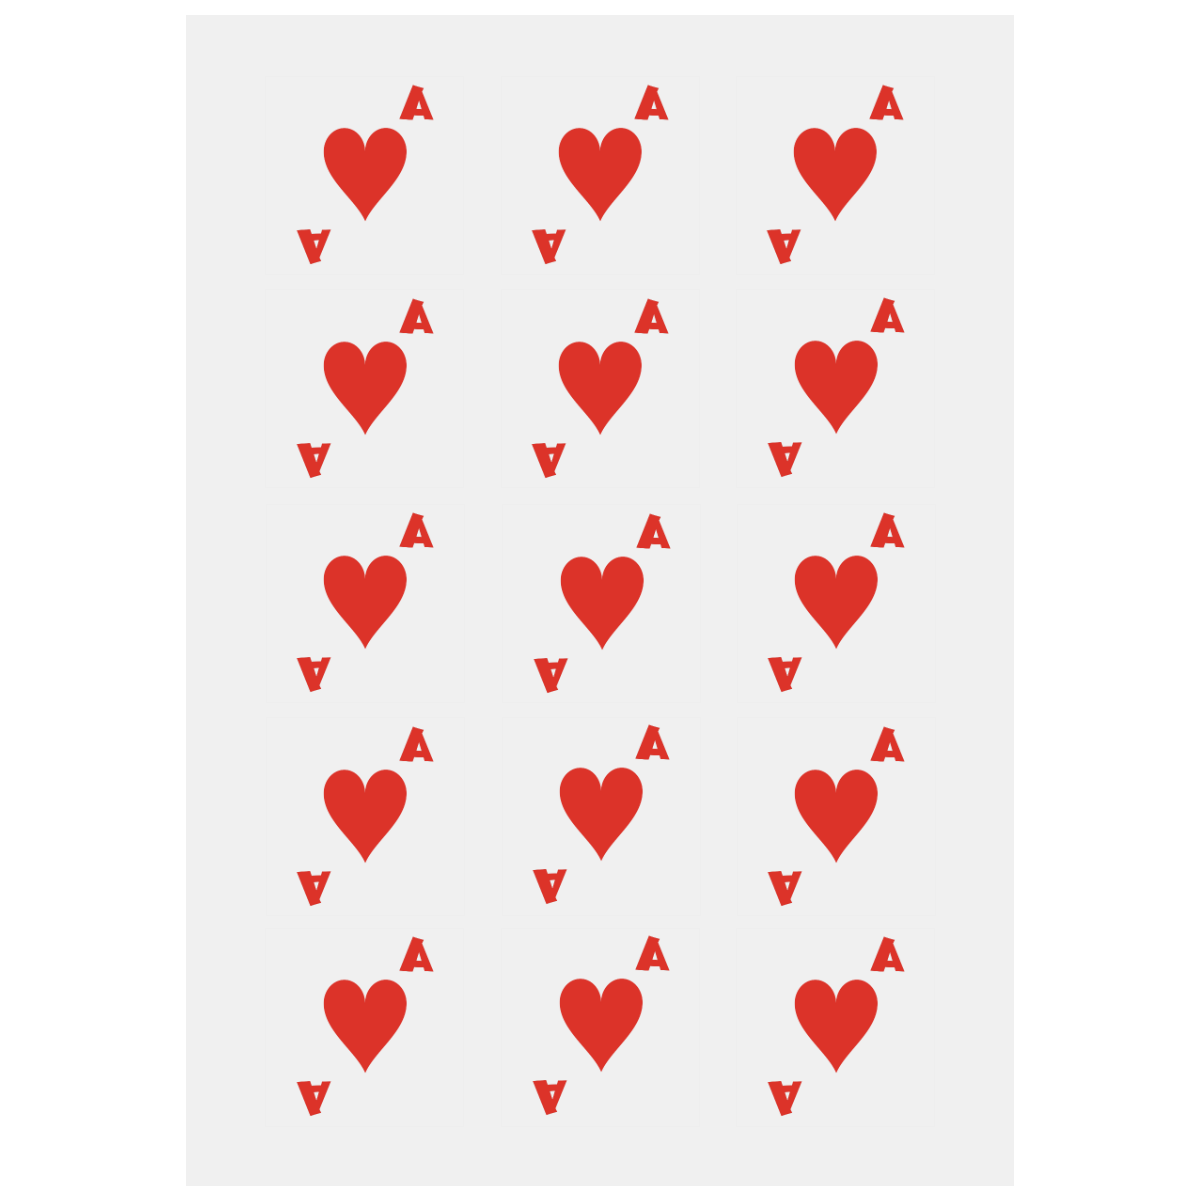 Playing Card Ace of Hearts Personalized Temporary Tattoo (15 Pieces)